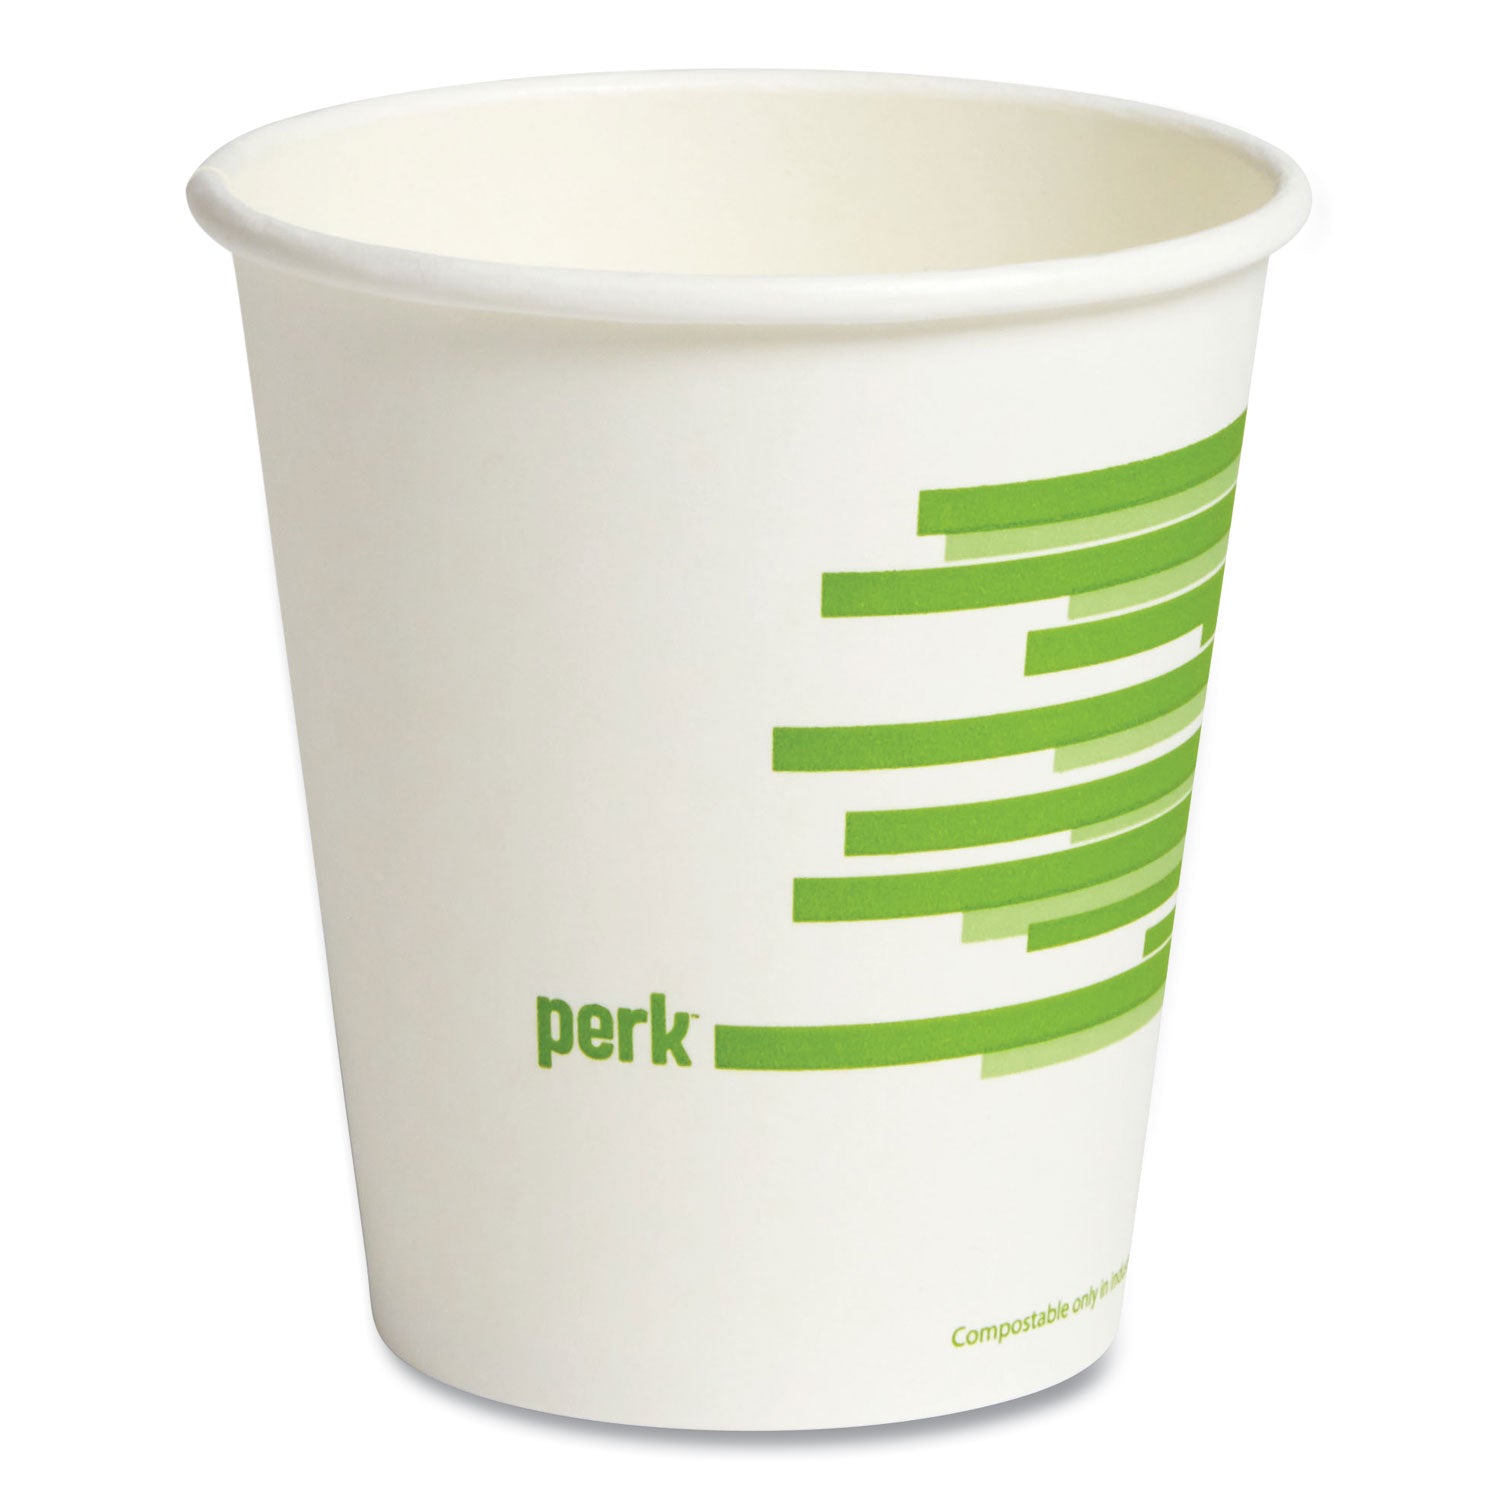 eco-id-compostable-paper-hot-cups-10-oz-white-green-50-pack_prk24394117 - 2